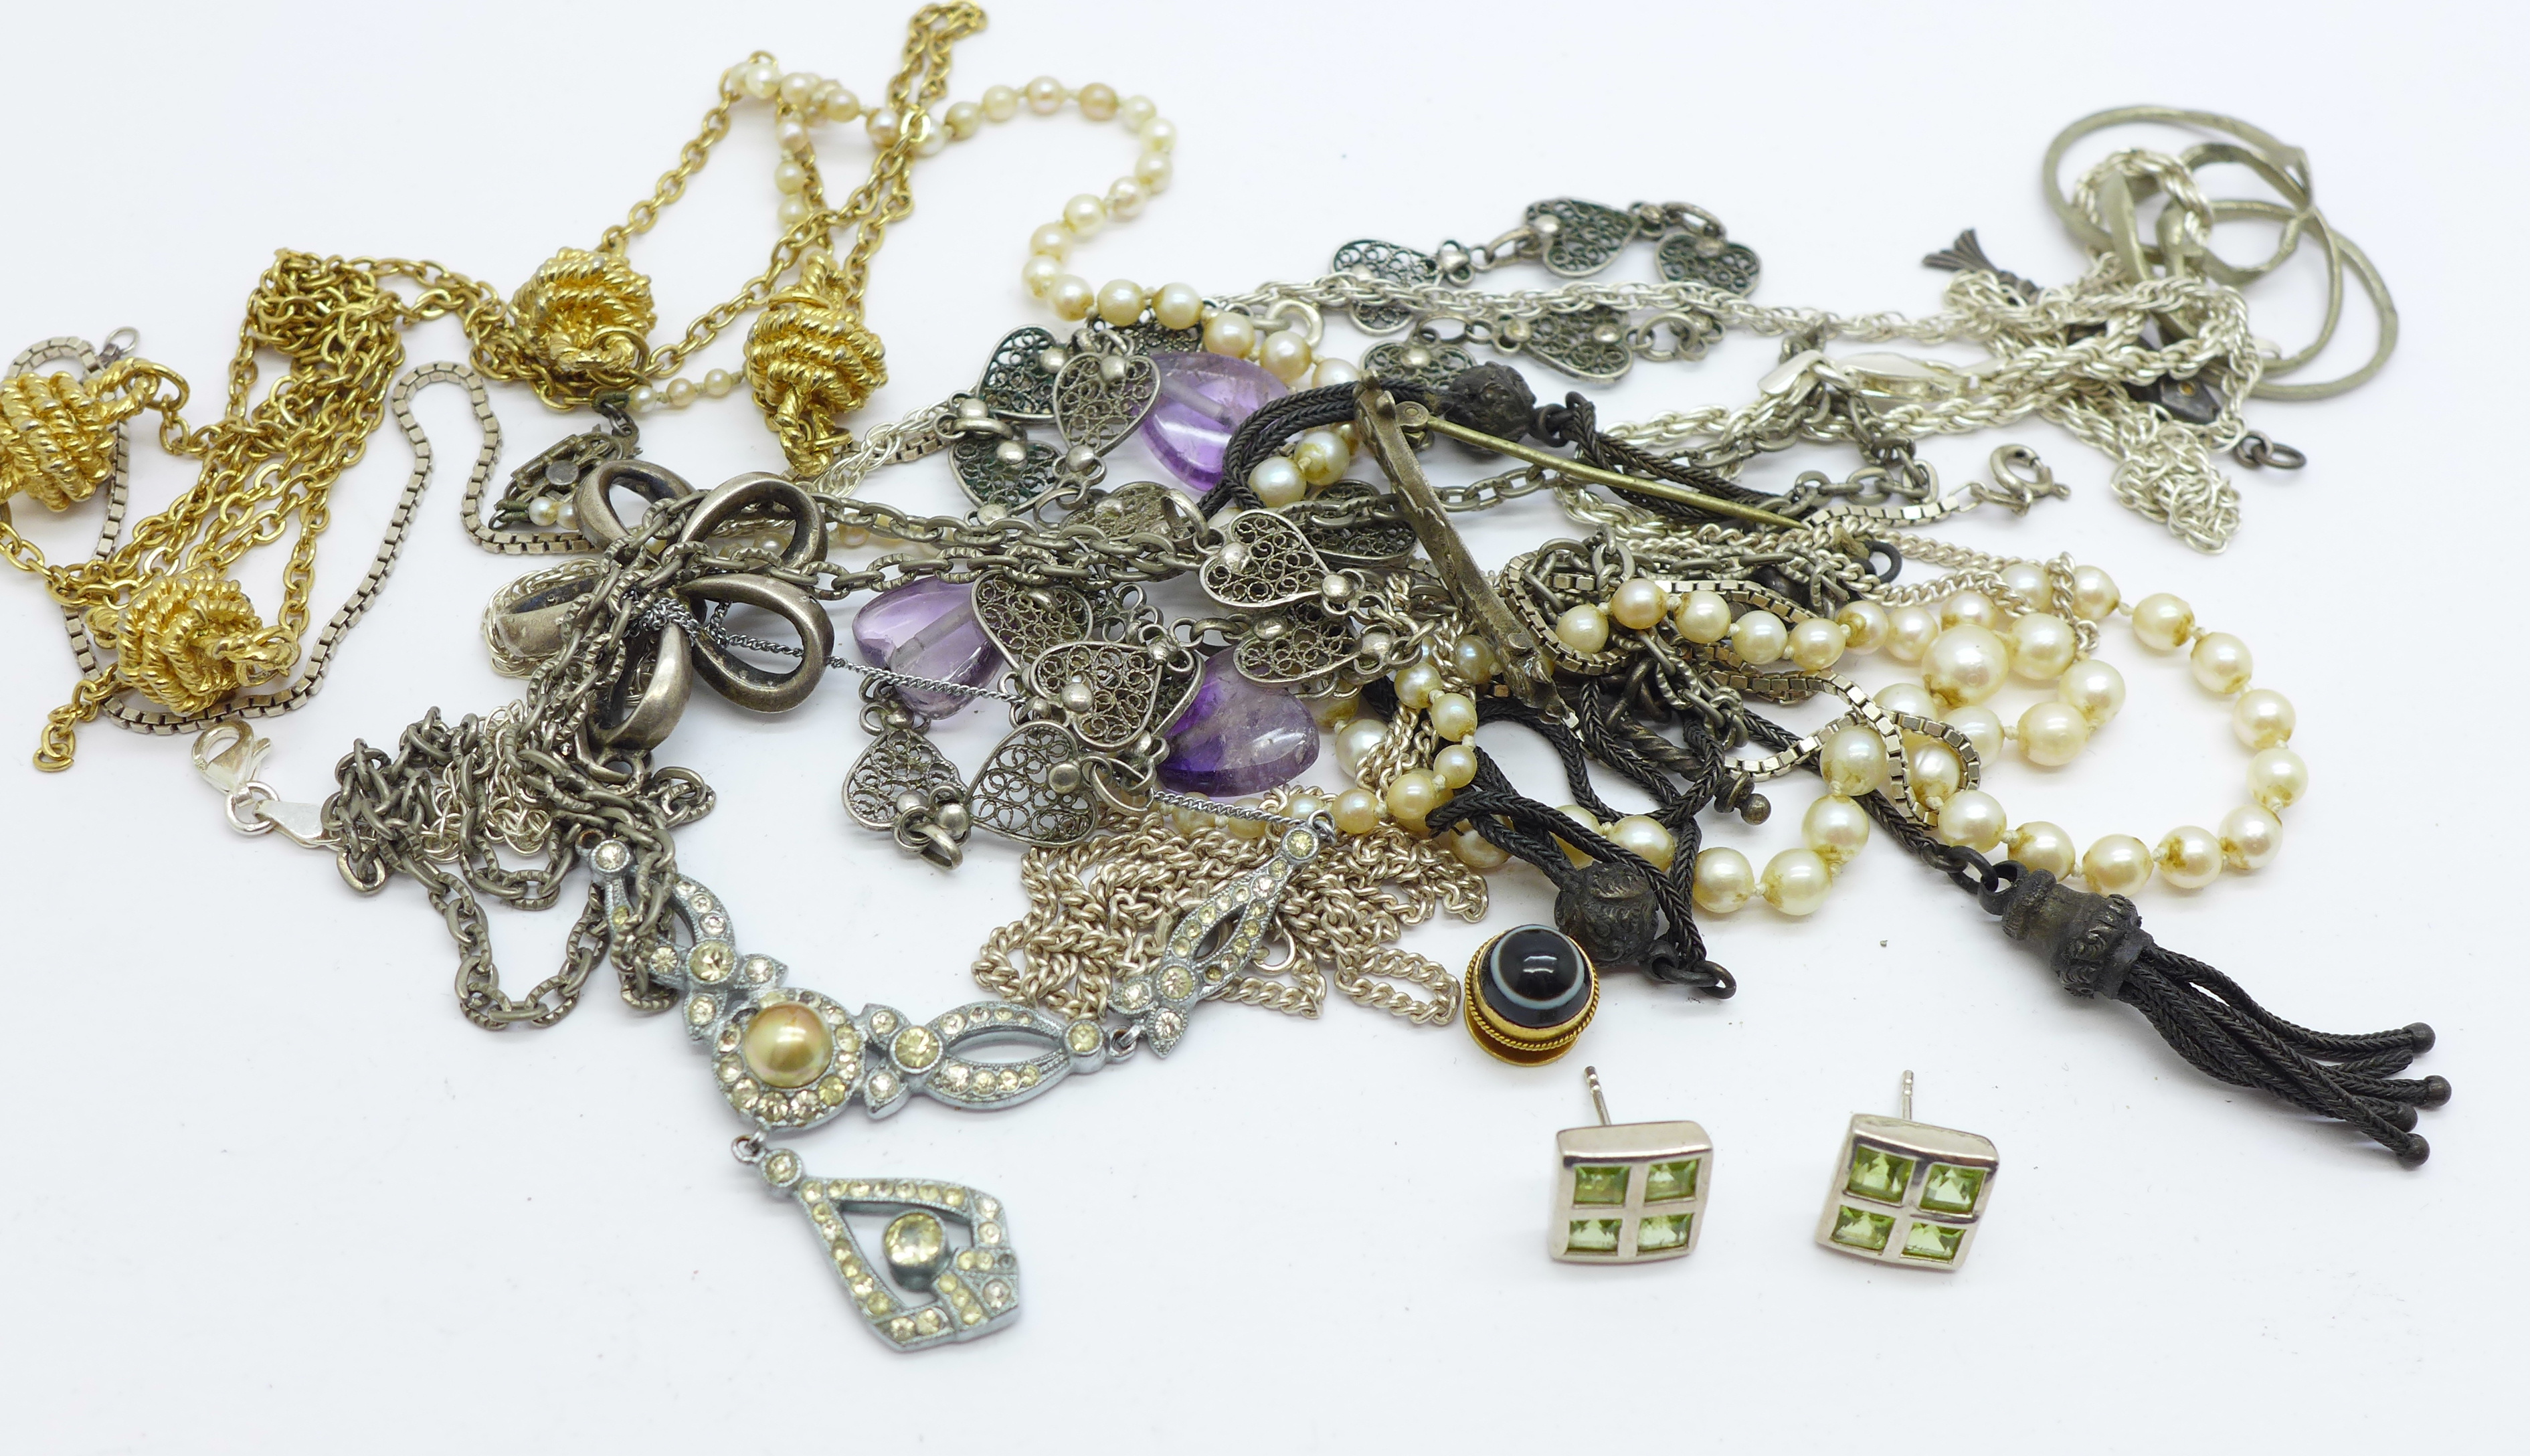 Costume jewellery including a silver brooch and a heart necklace - Image 2 of 5